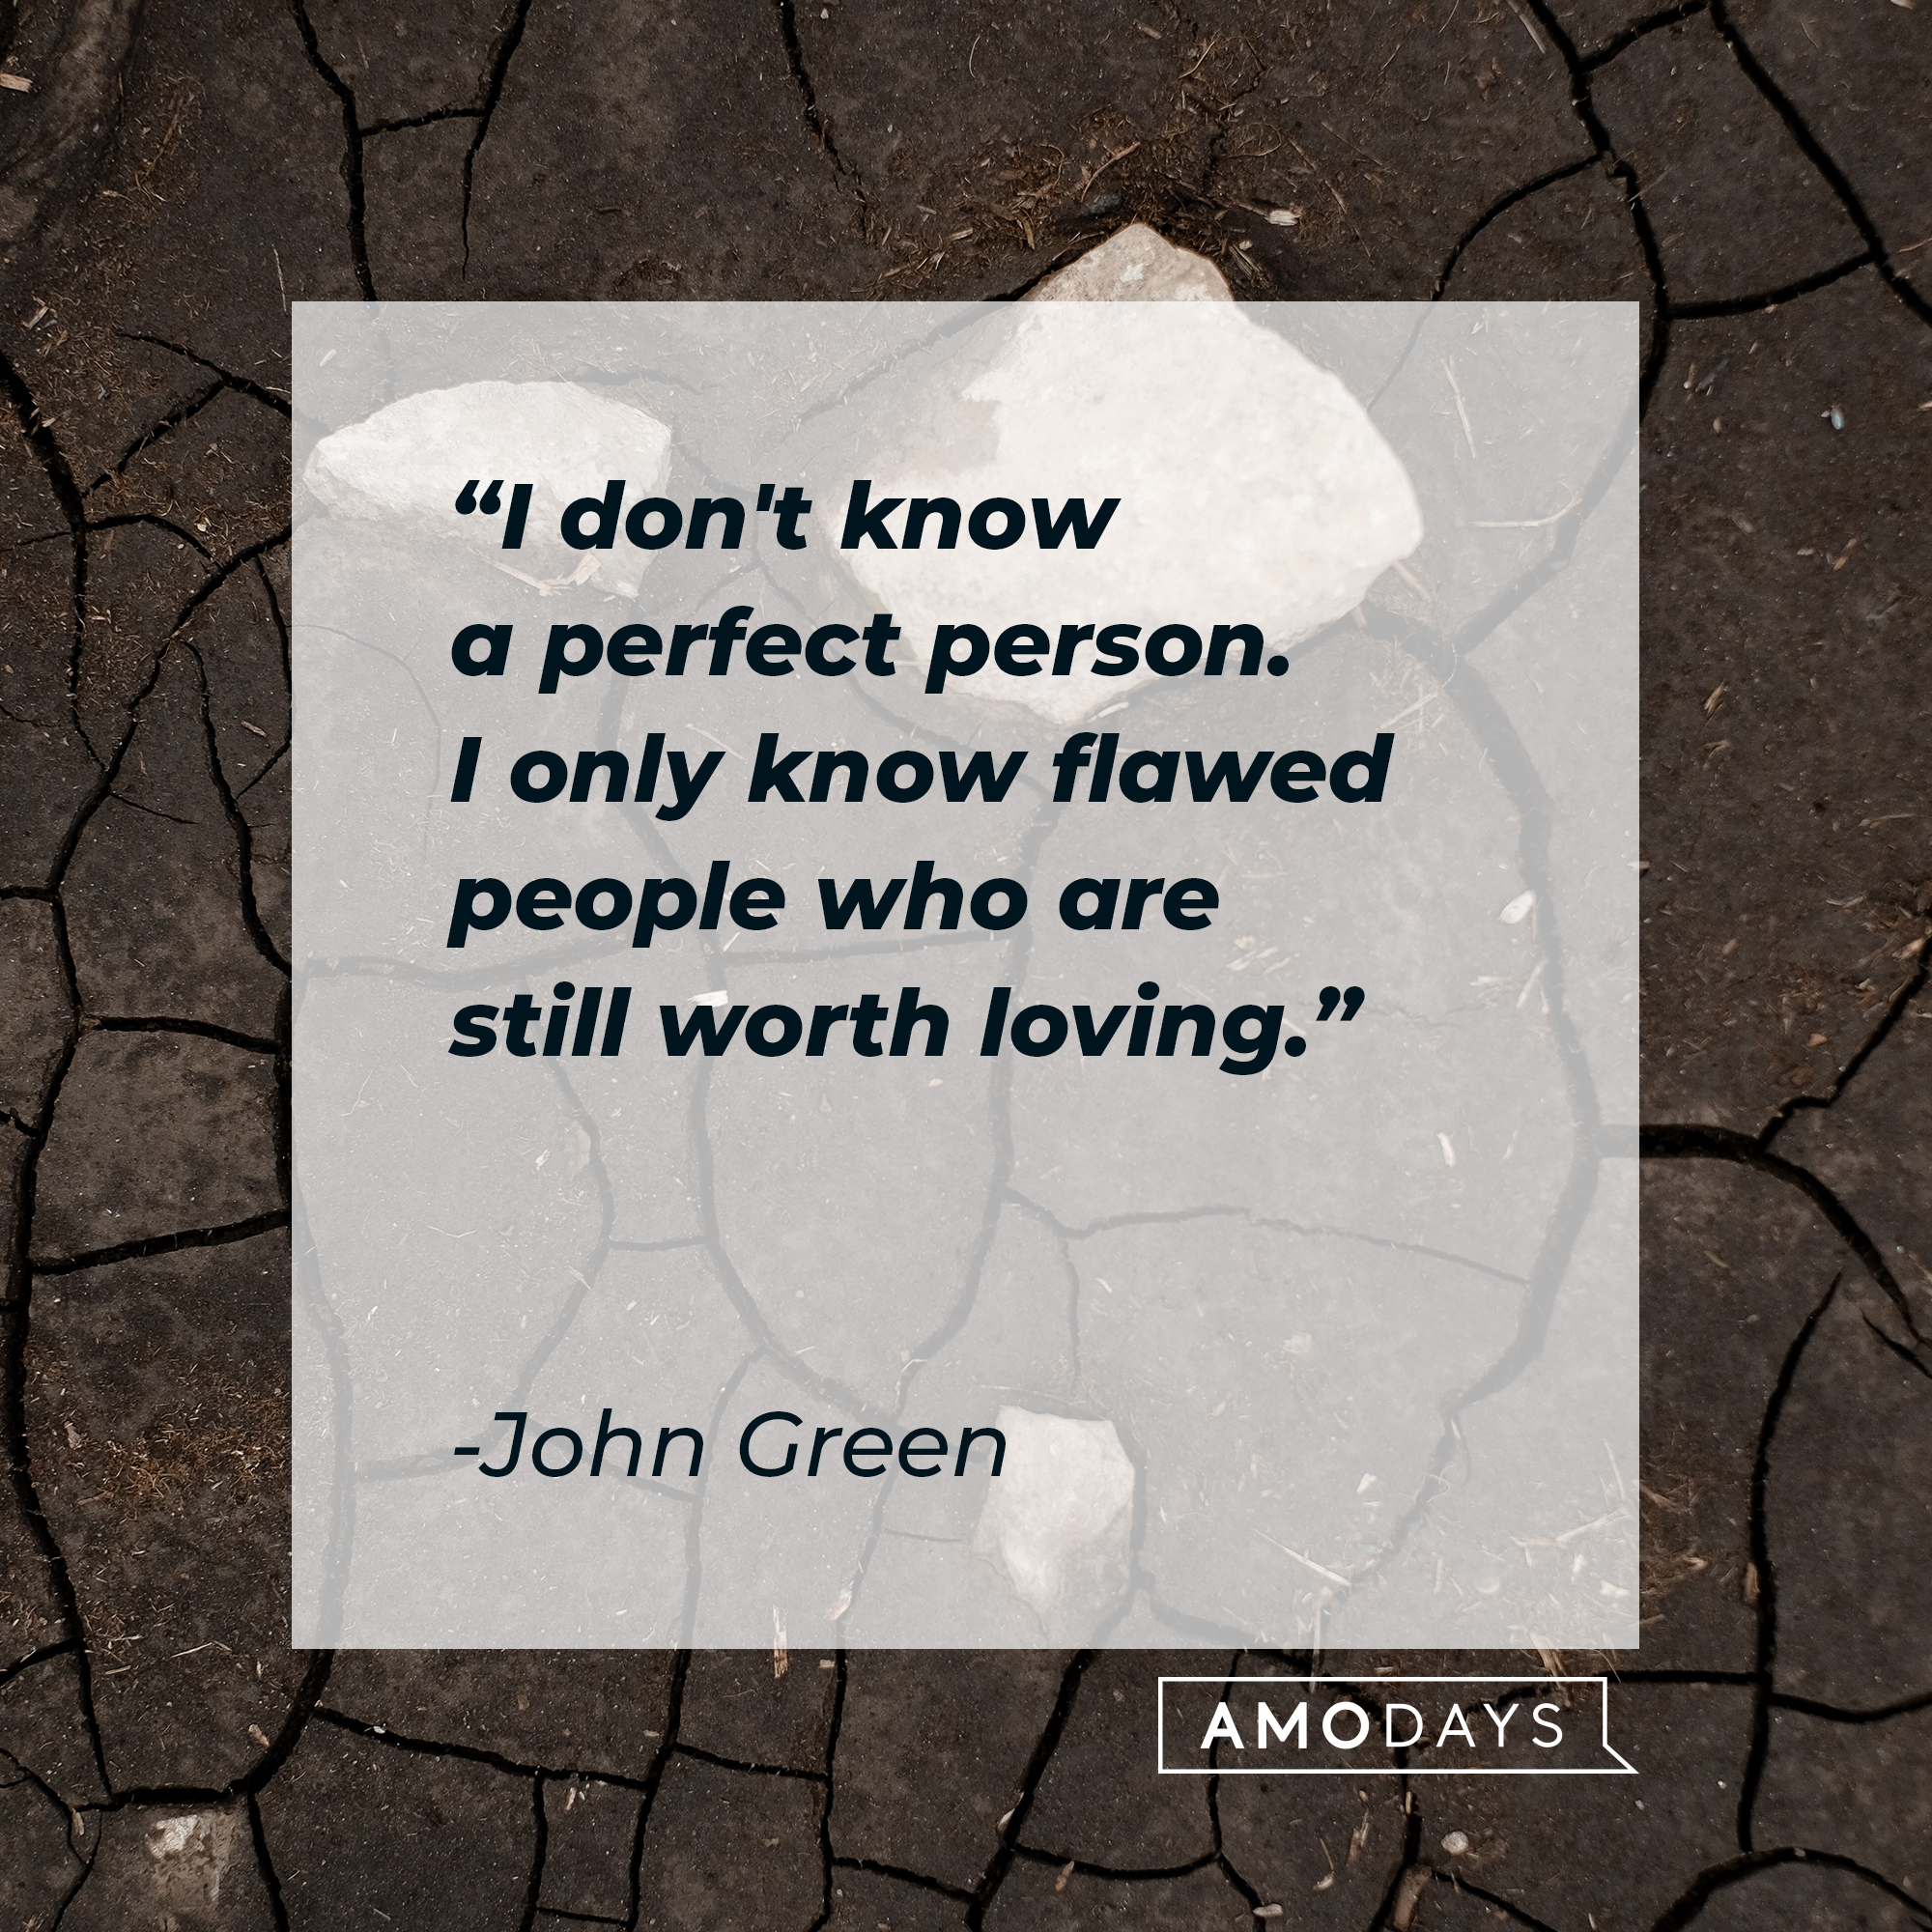 John Green's quote: "I don't know a perfect person. I only know flawed people who are still worth loving." | Image: Unsplash